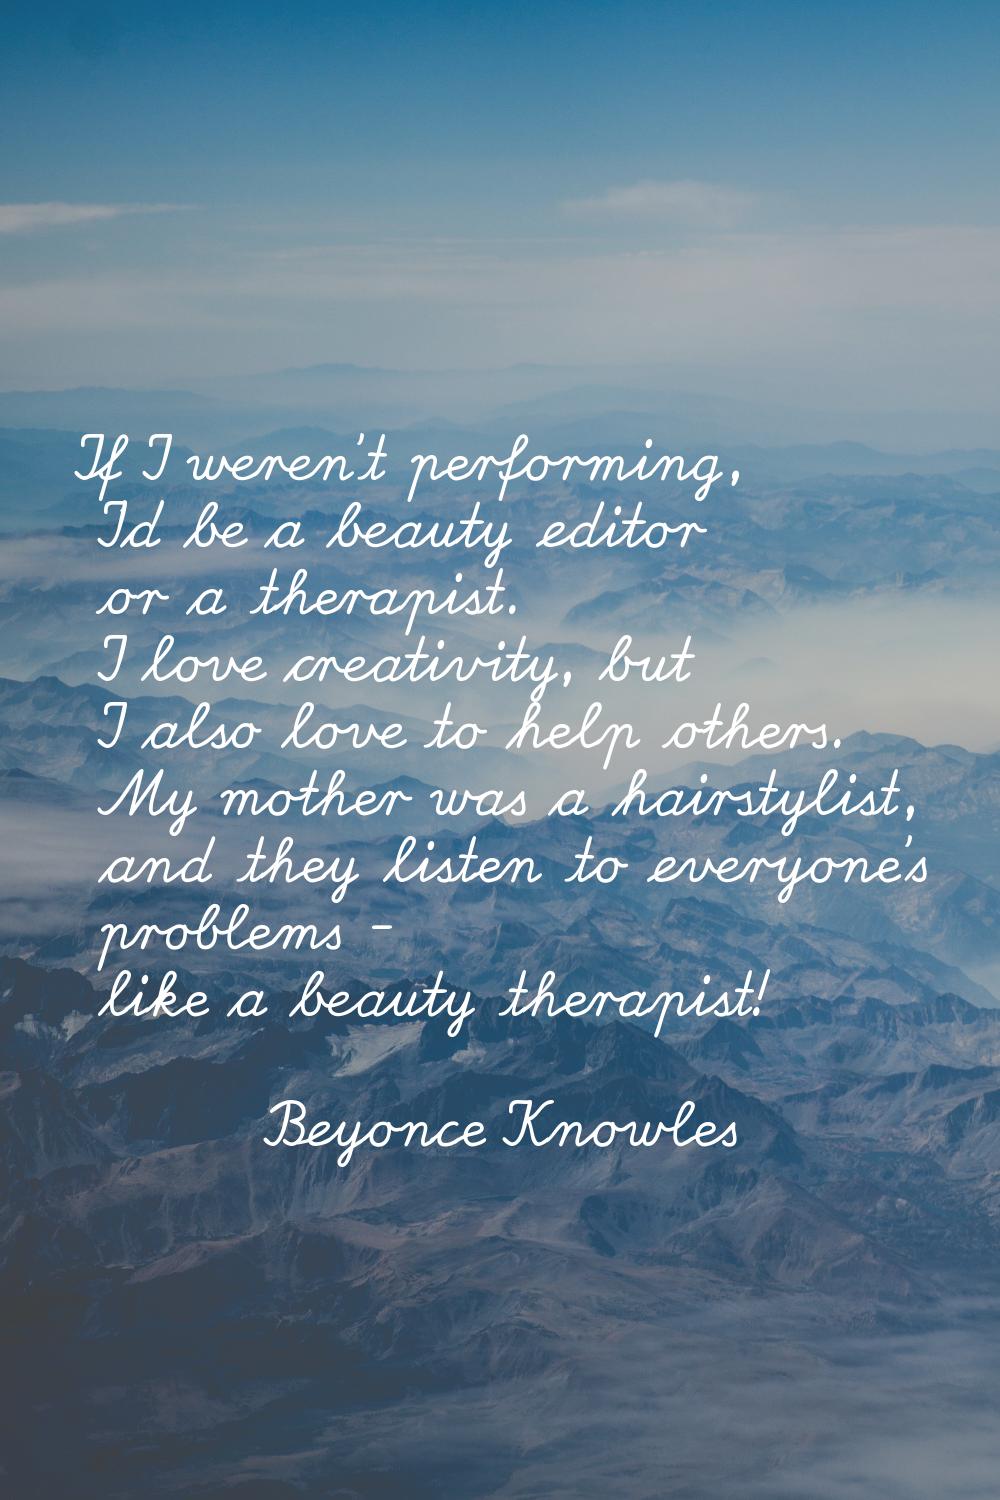 If I weren't performing, I'd be a beauty editor or a therapist. I love creativity, but I also love 